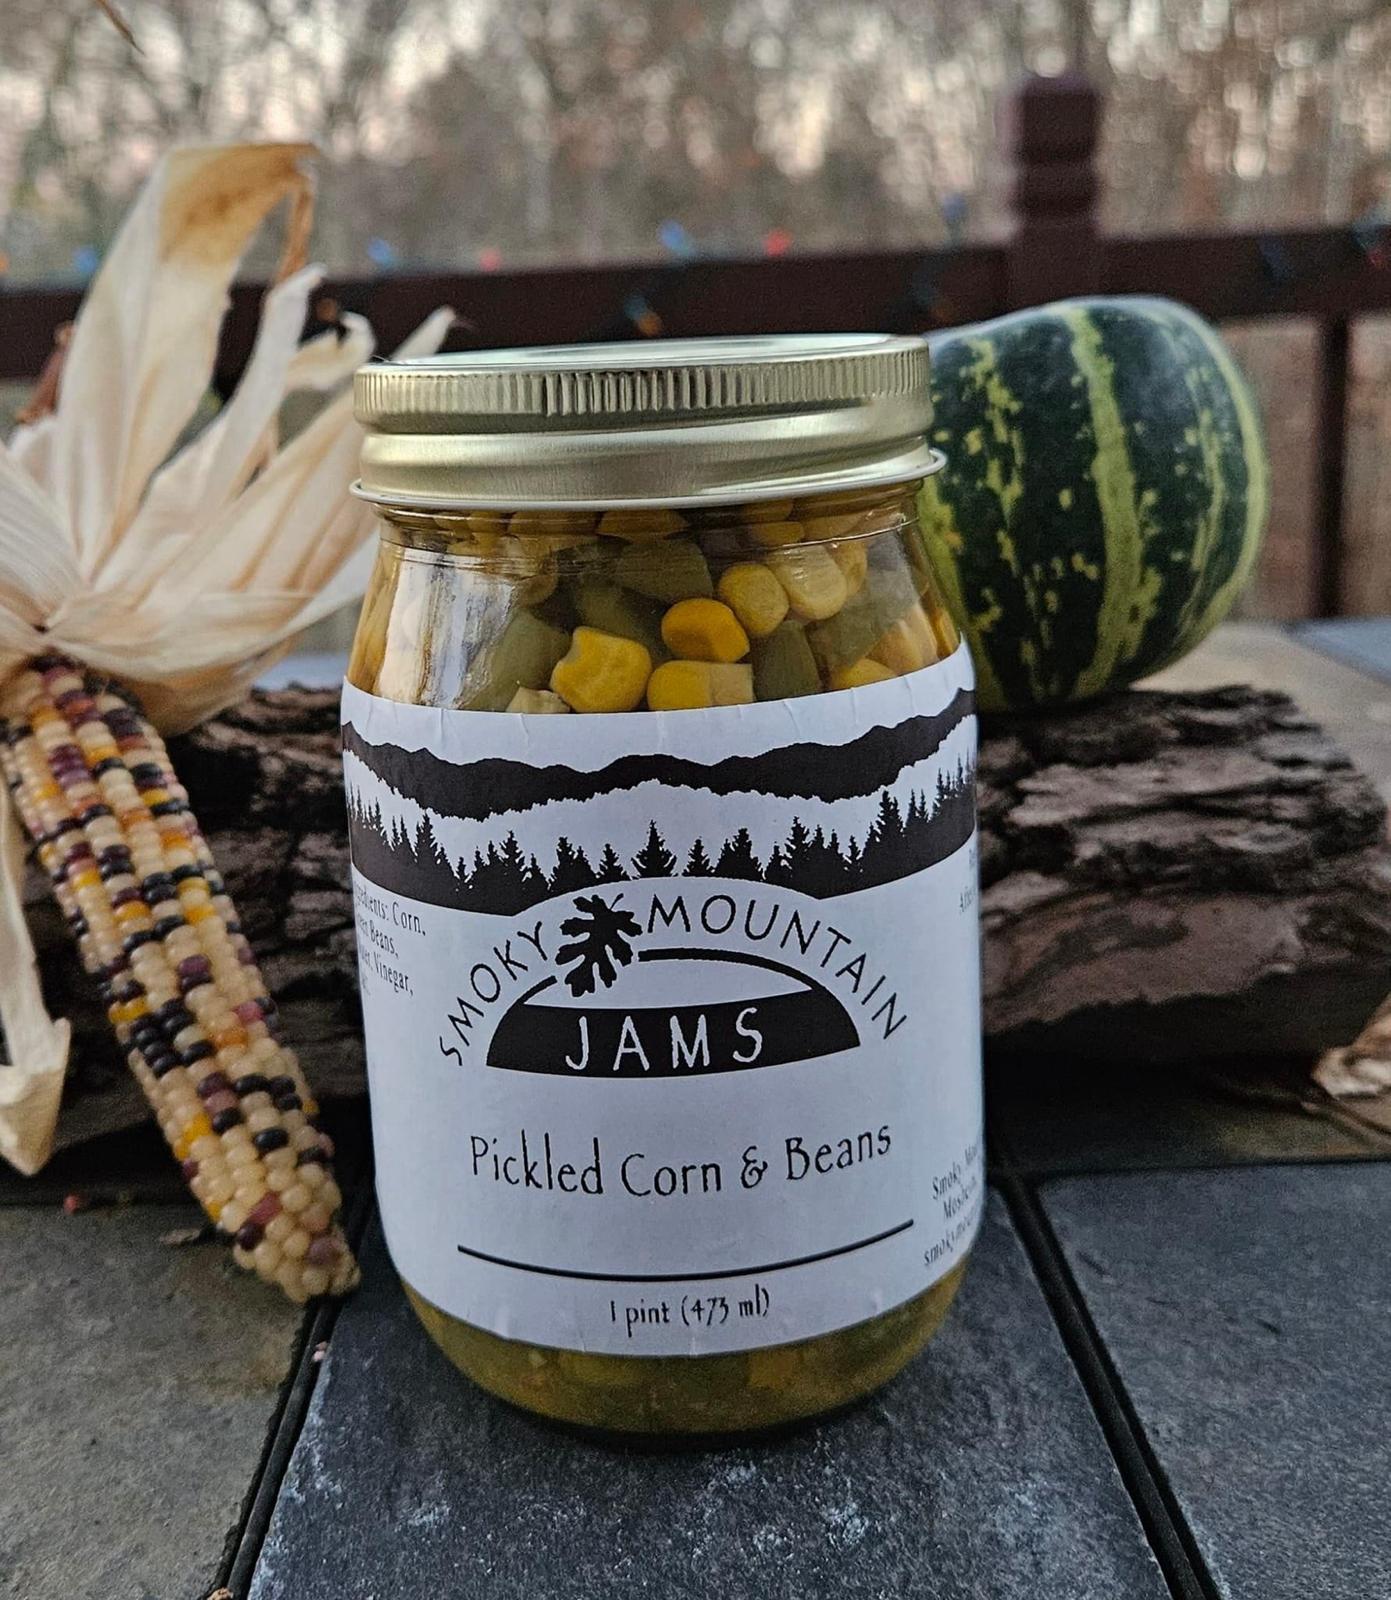 Smoky Mountain Jams Pickled Corn & Beans